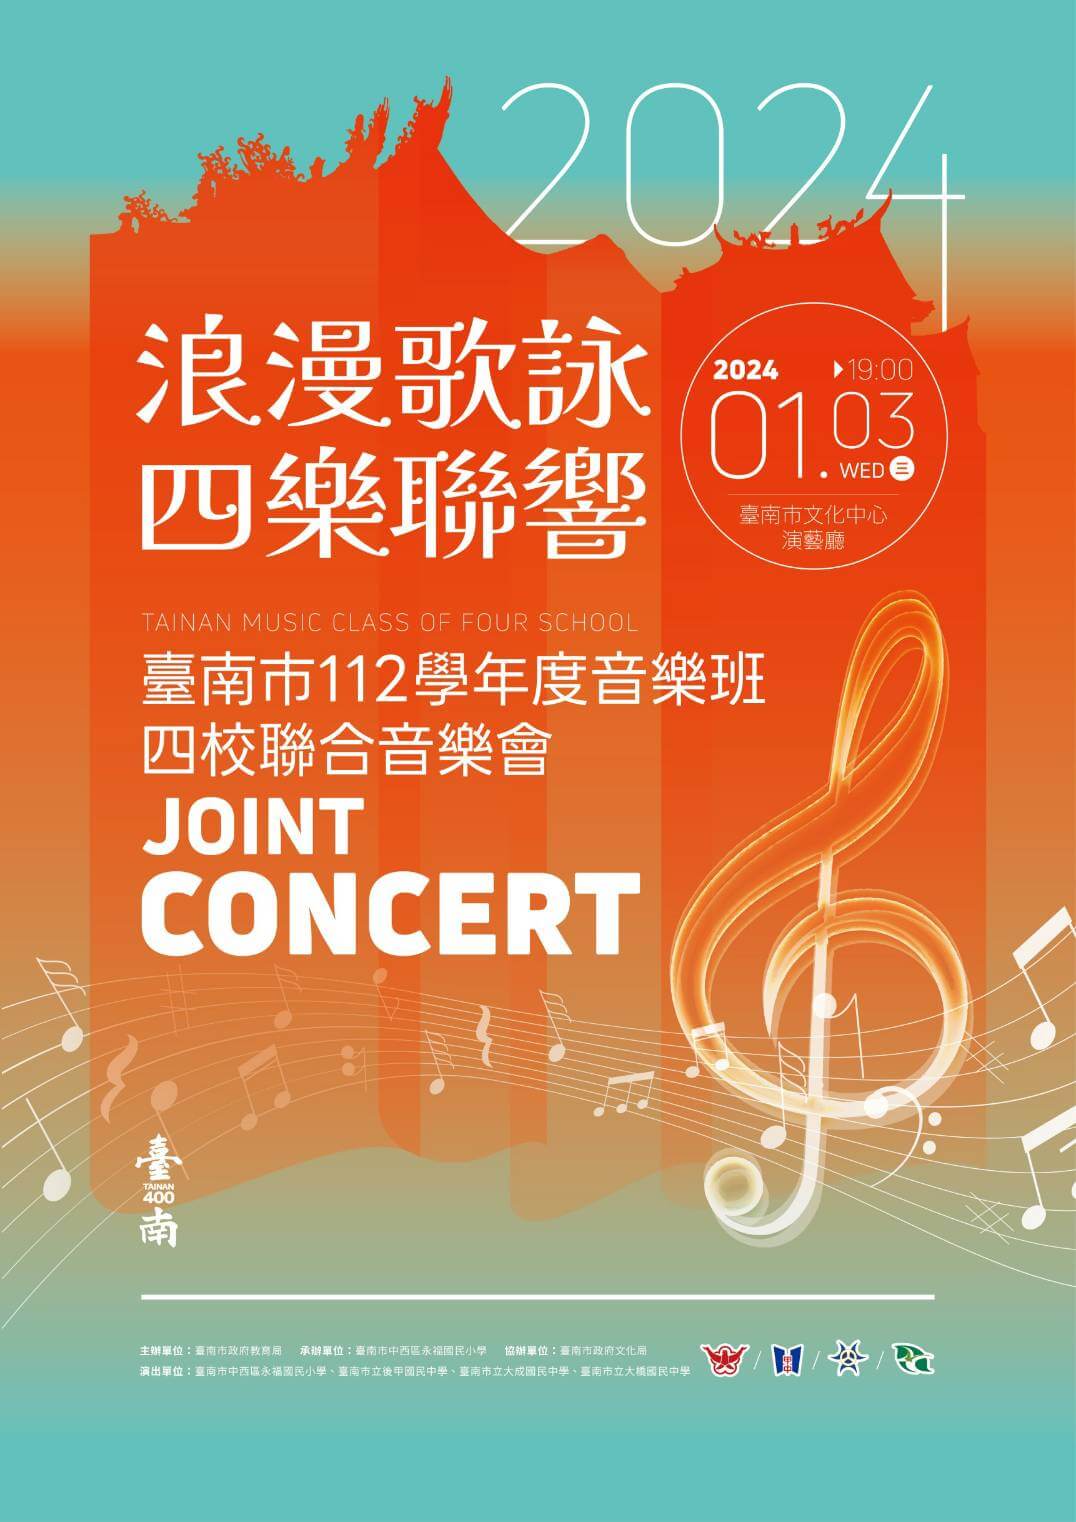 Tainan Music Class of Four School Joint Concert